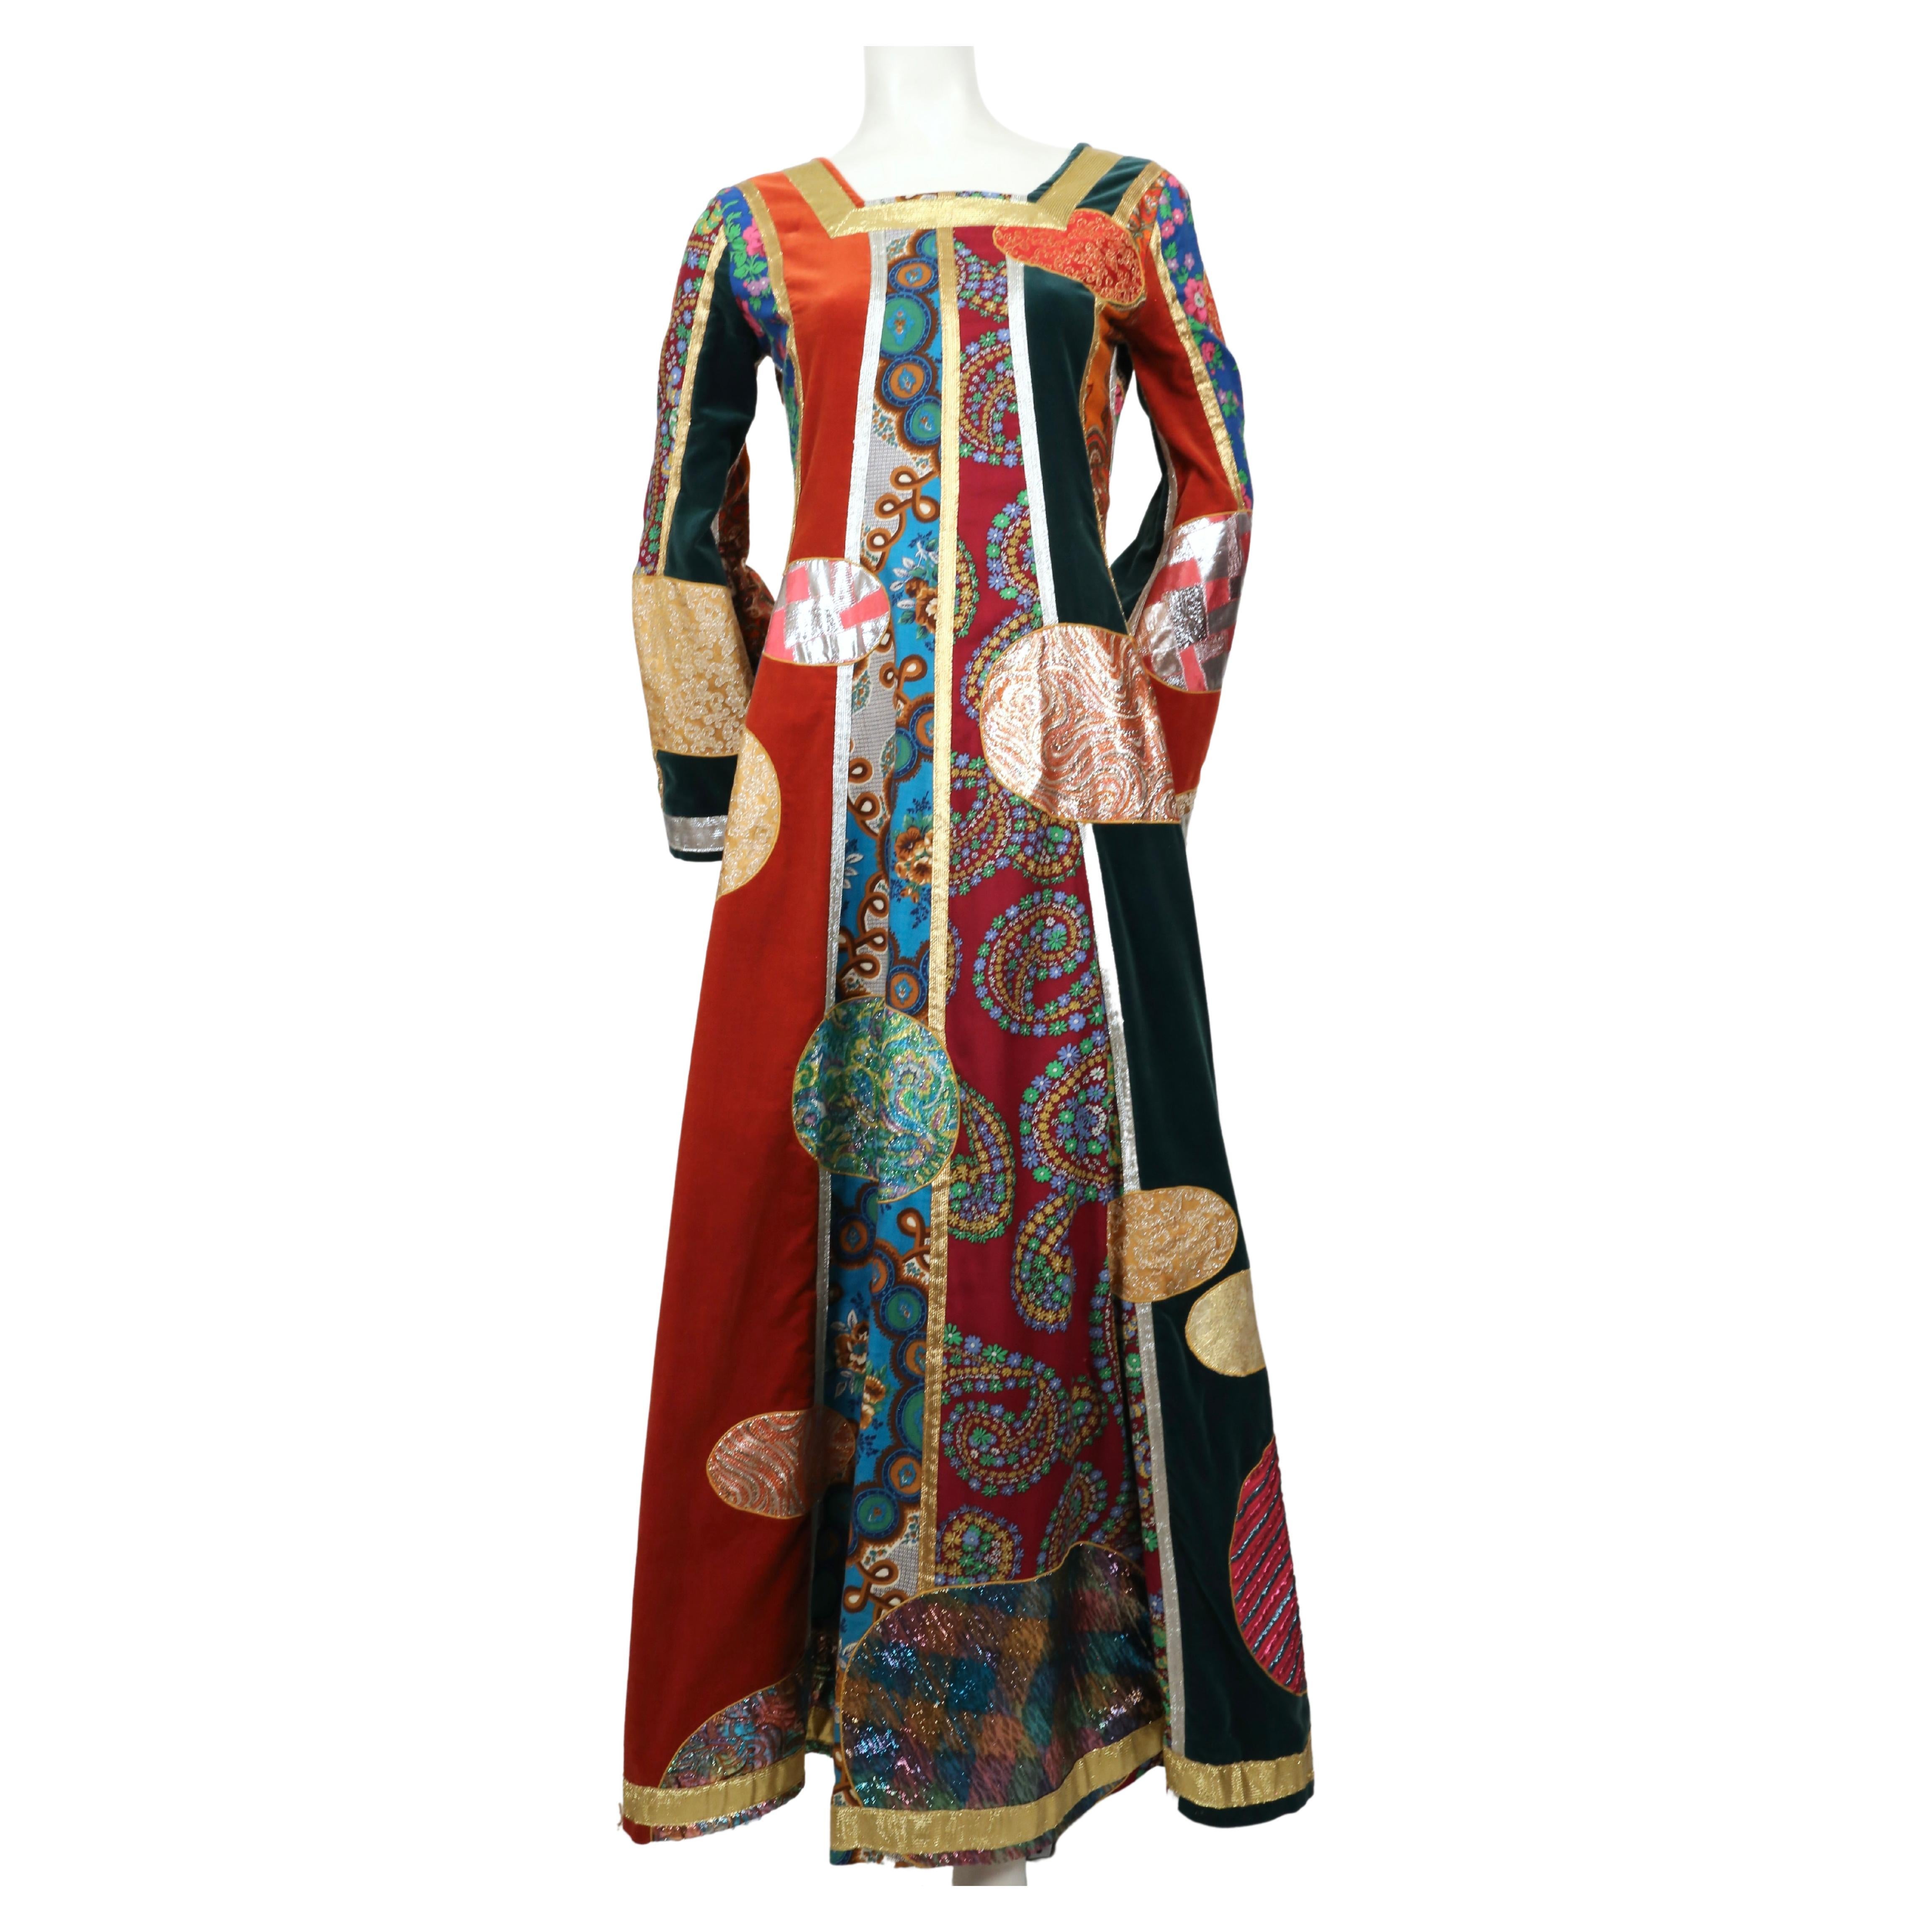 Very rare, 'Klimt patchwork' dress designed by Giorgio di Sant' Angelo dating to his iconic 1969 Fall collection. Sant' Angelo first came to prominence in 1968 when asked by Diana Vreeland to join Vogue as a stylist. The following year,  Sant'